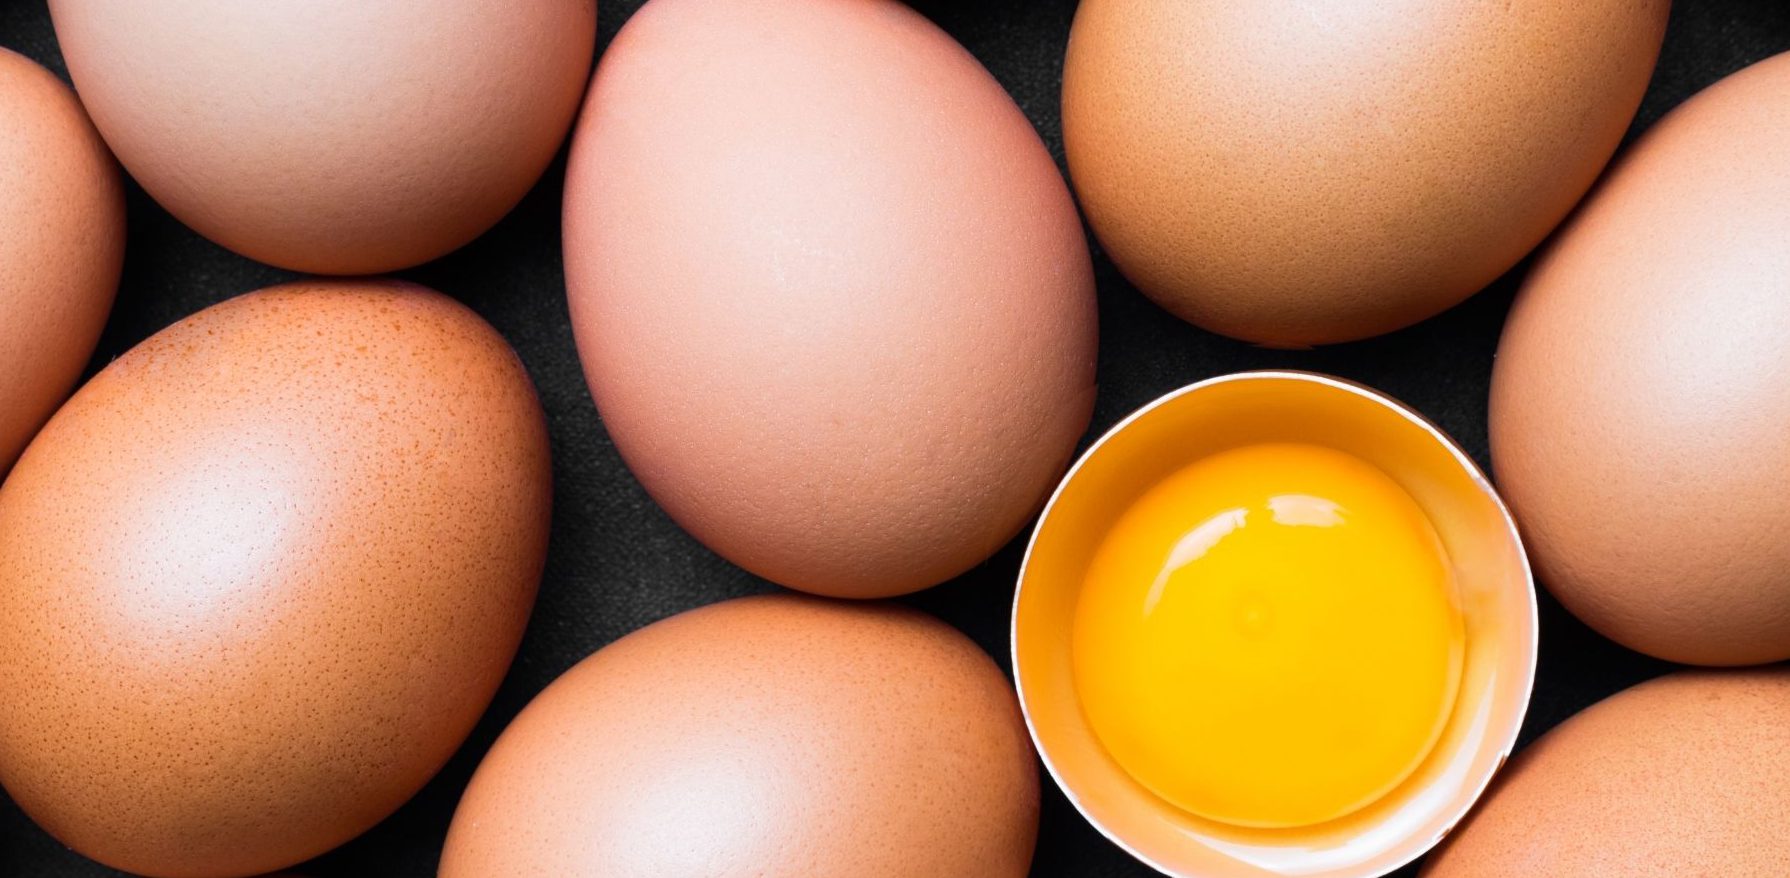 Global Egg Market Size, Forecasts, And Opportunities